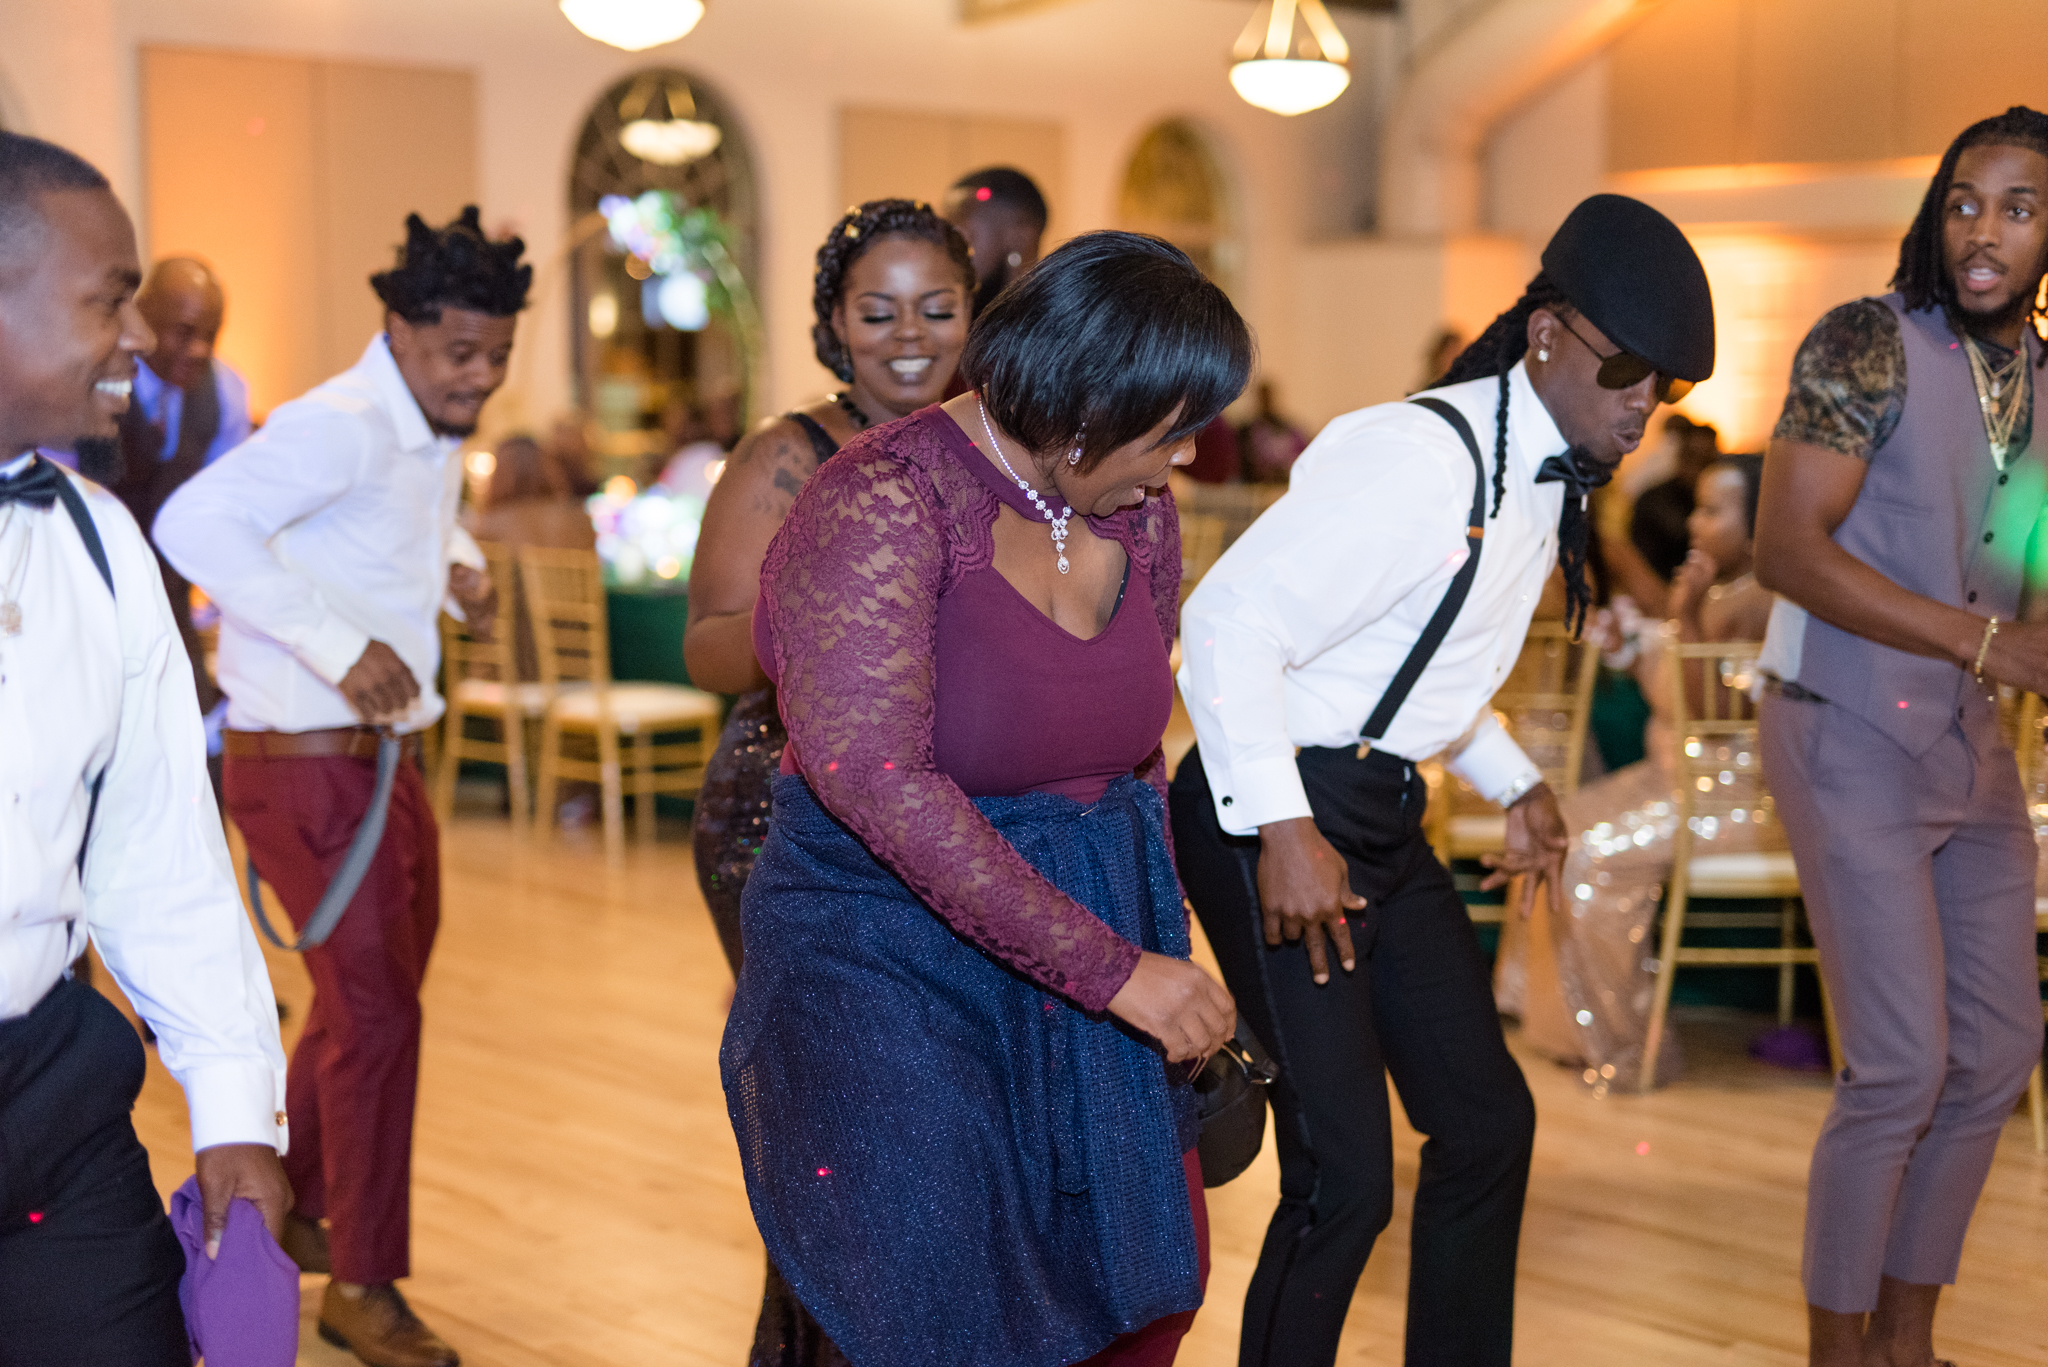 Guests dance at wedding reception.